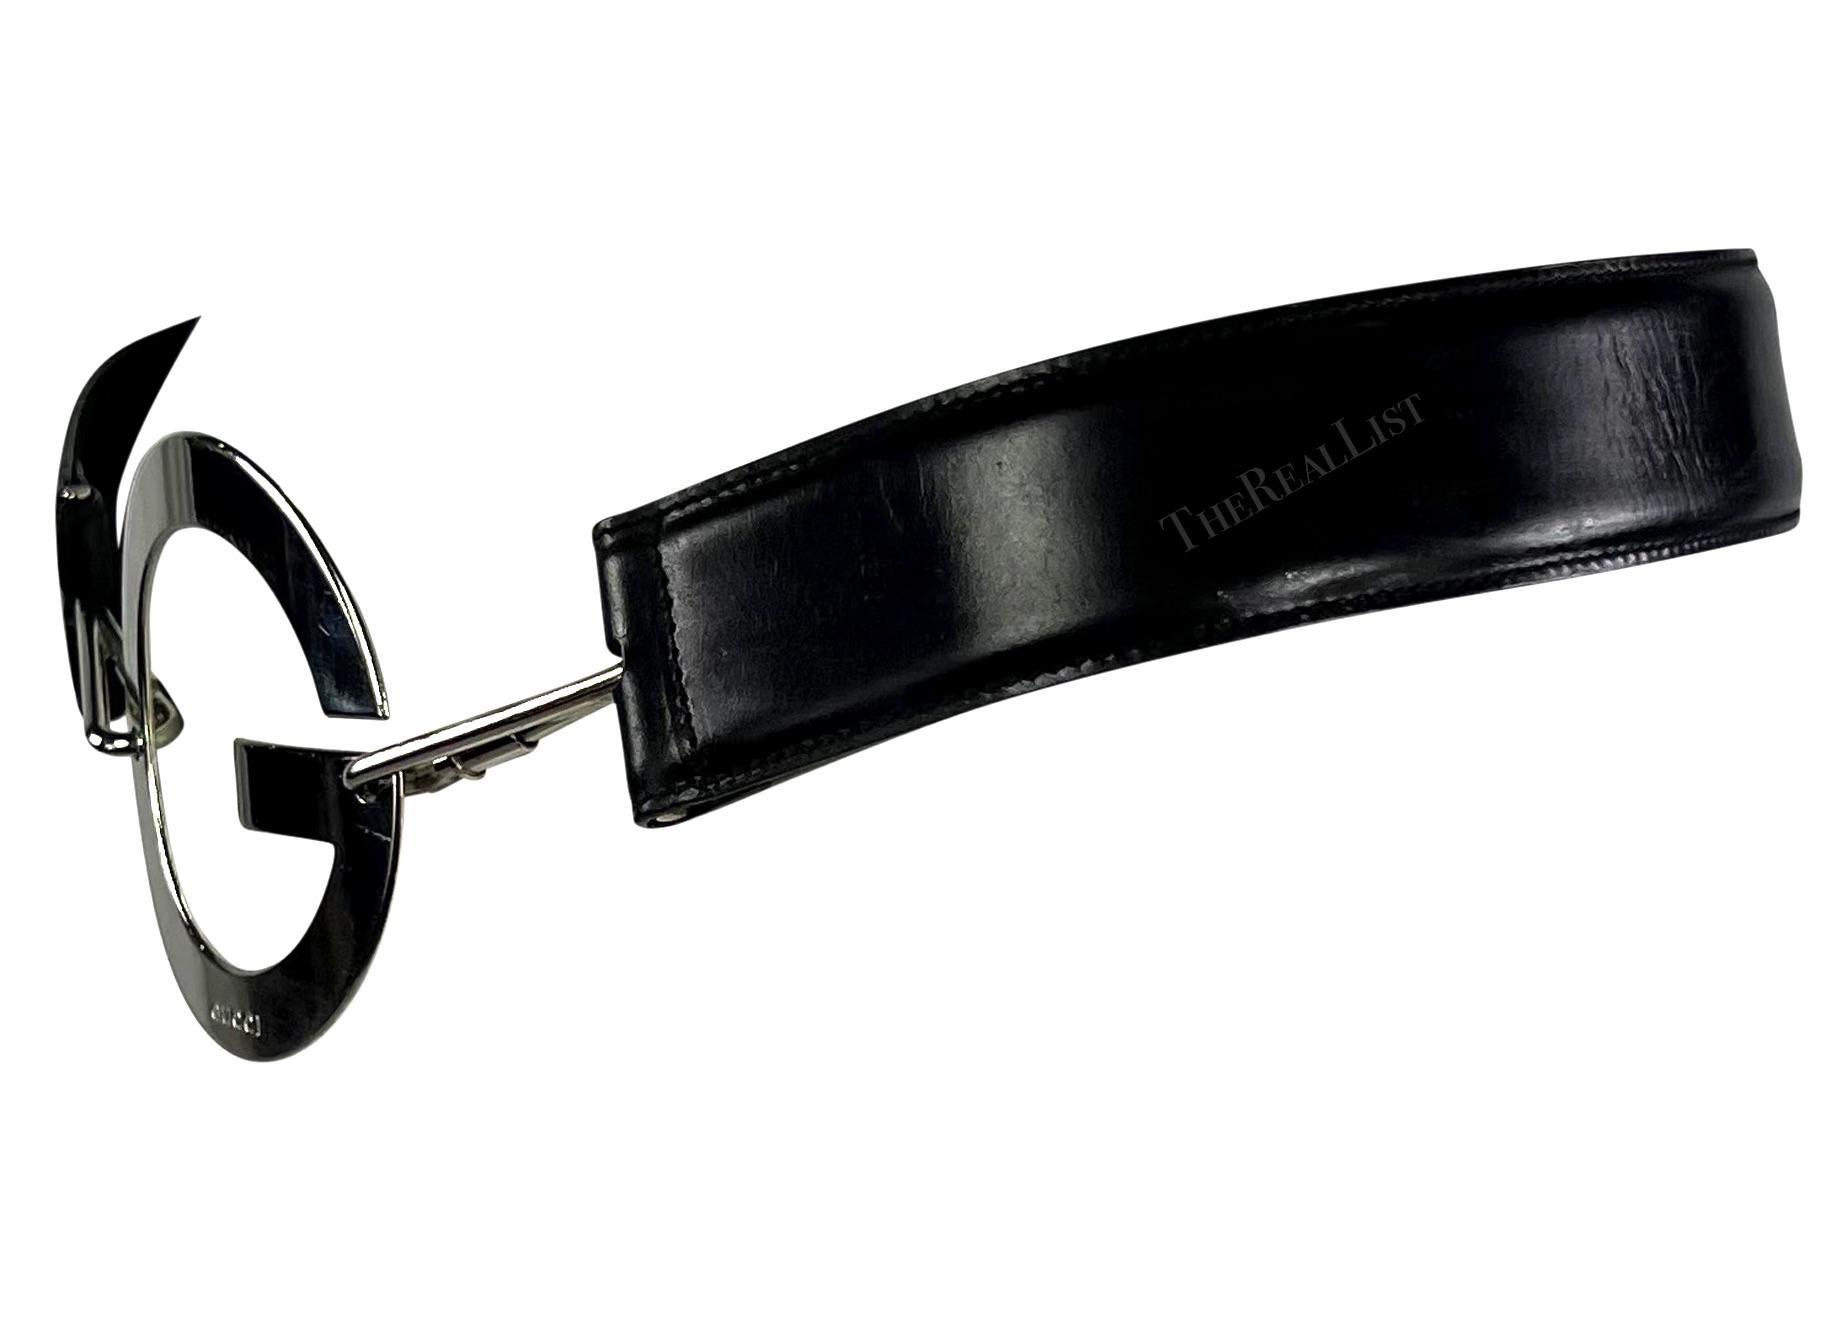 S/S 1996 Gucci by Tom Ford Silver Round G Medallion Buckle Black Belt For Sale 3